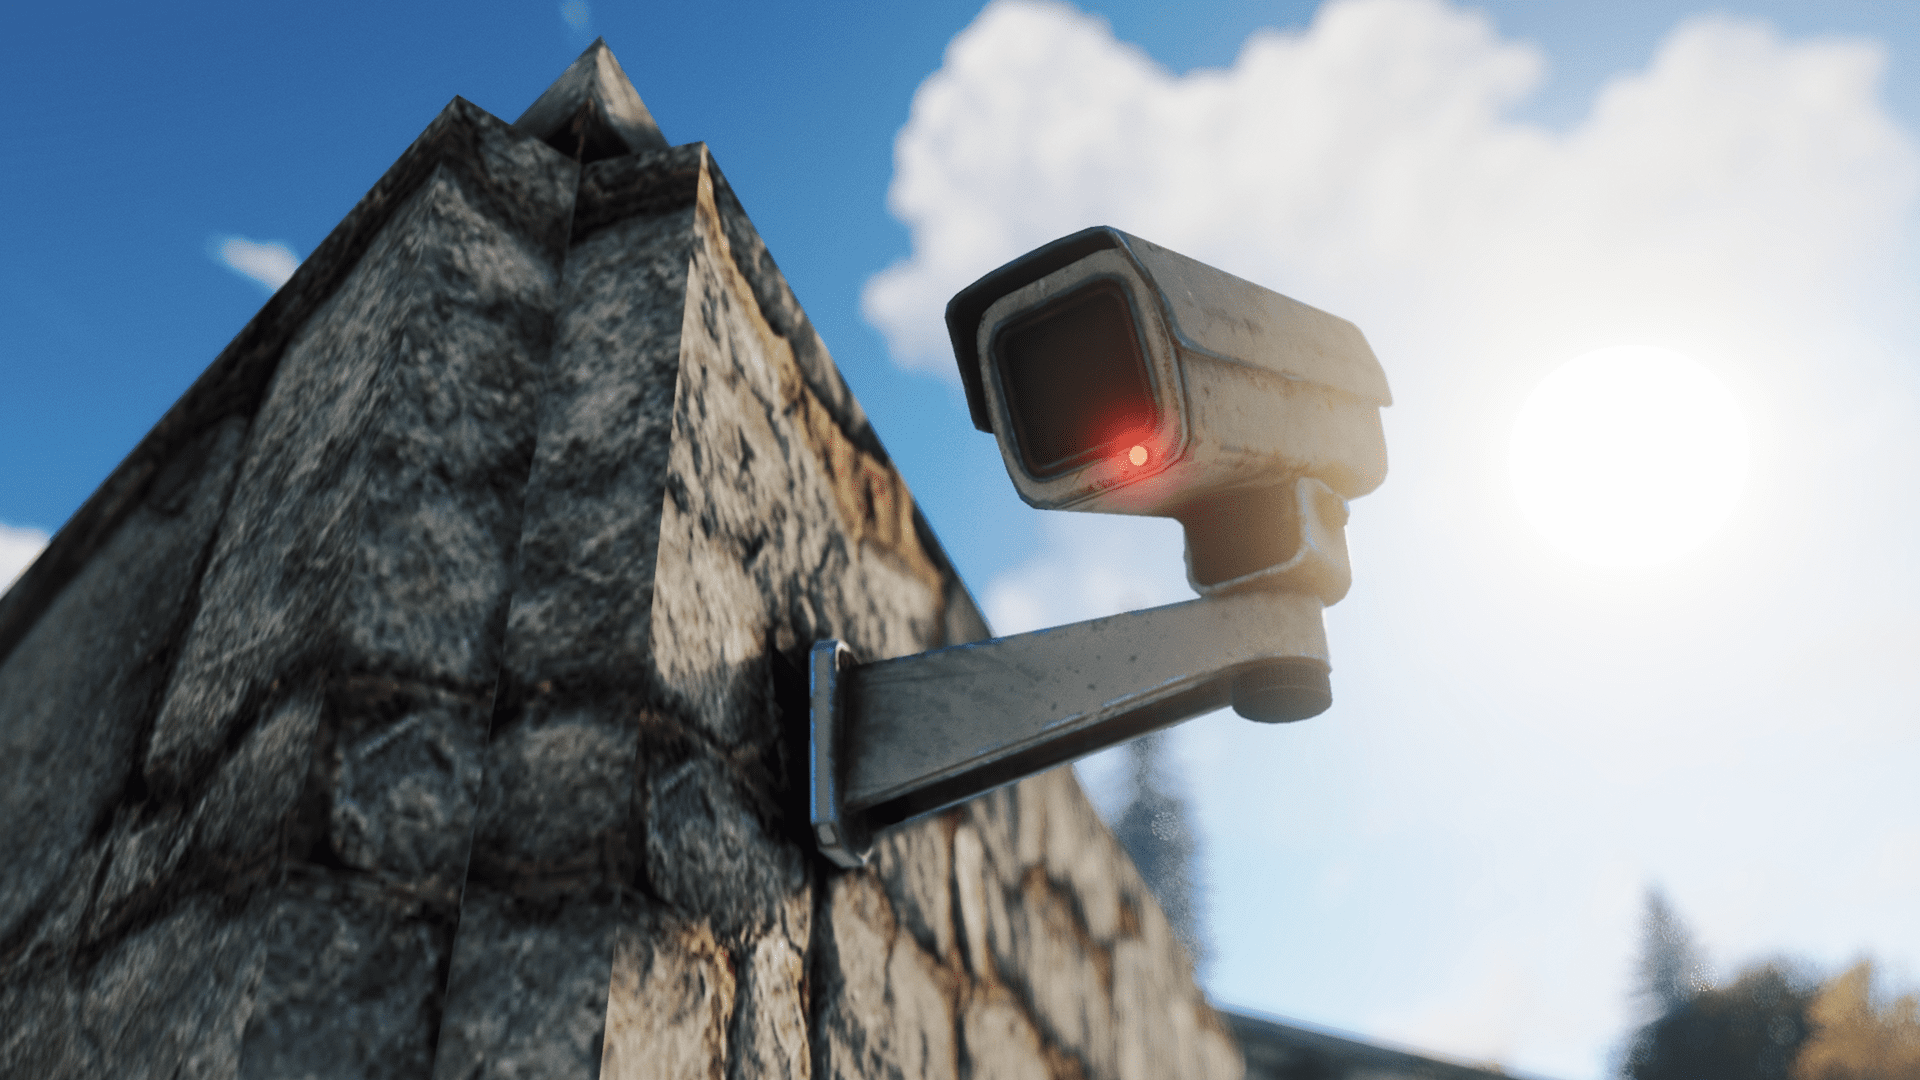 New CCTV Camerasystem added to Rust, how does it work?